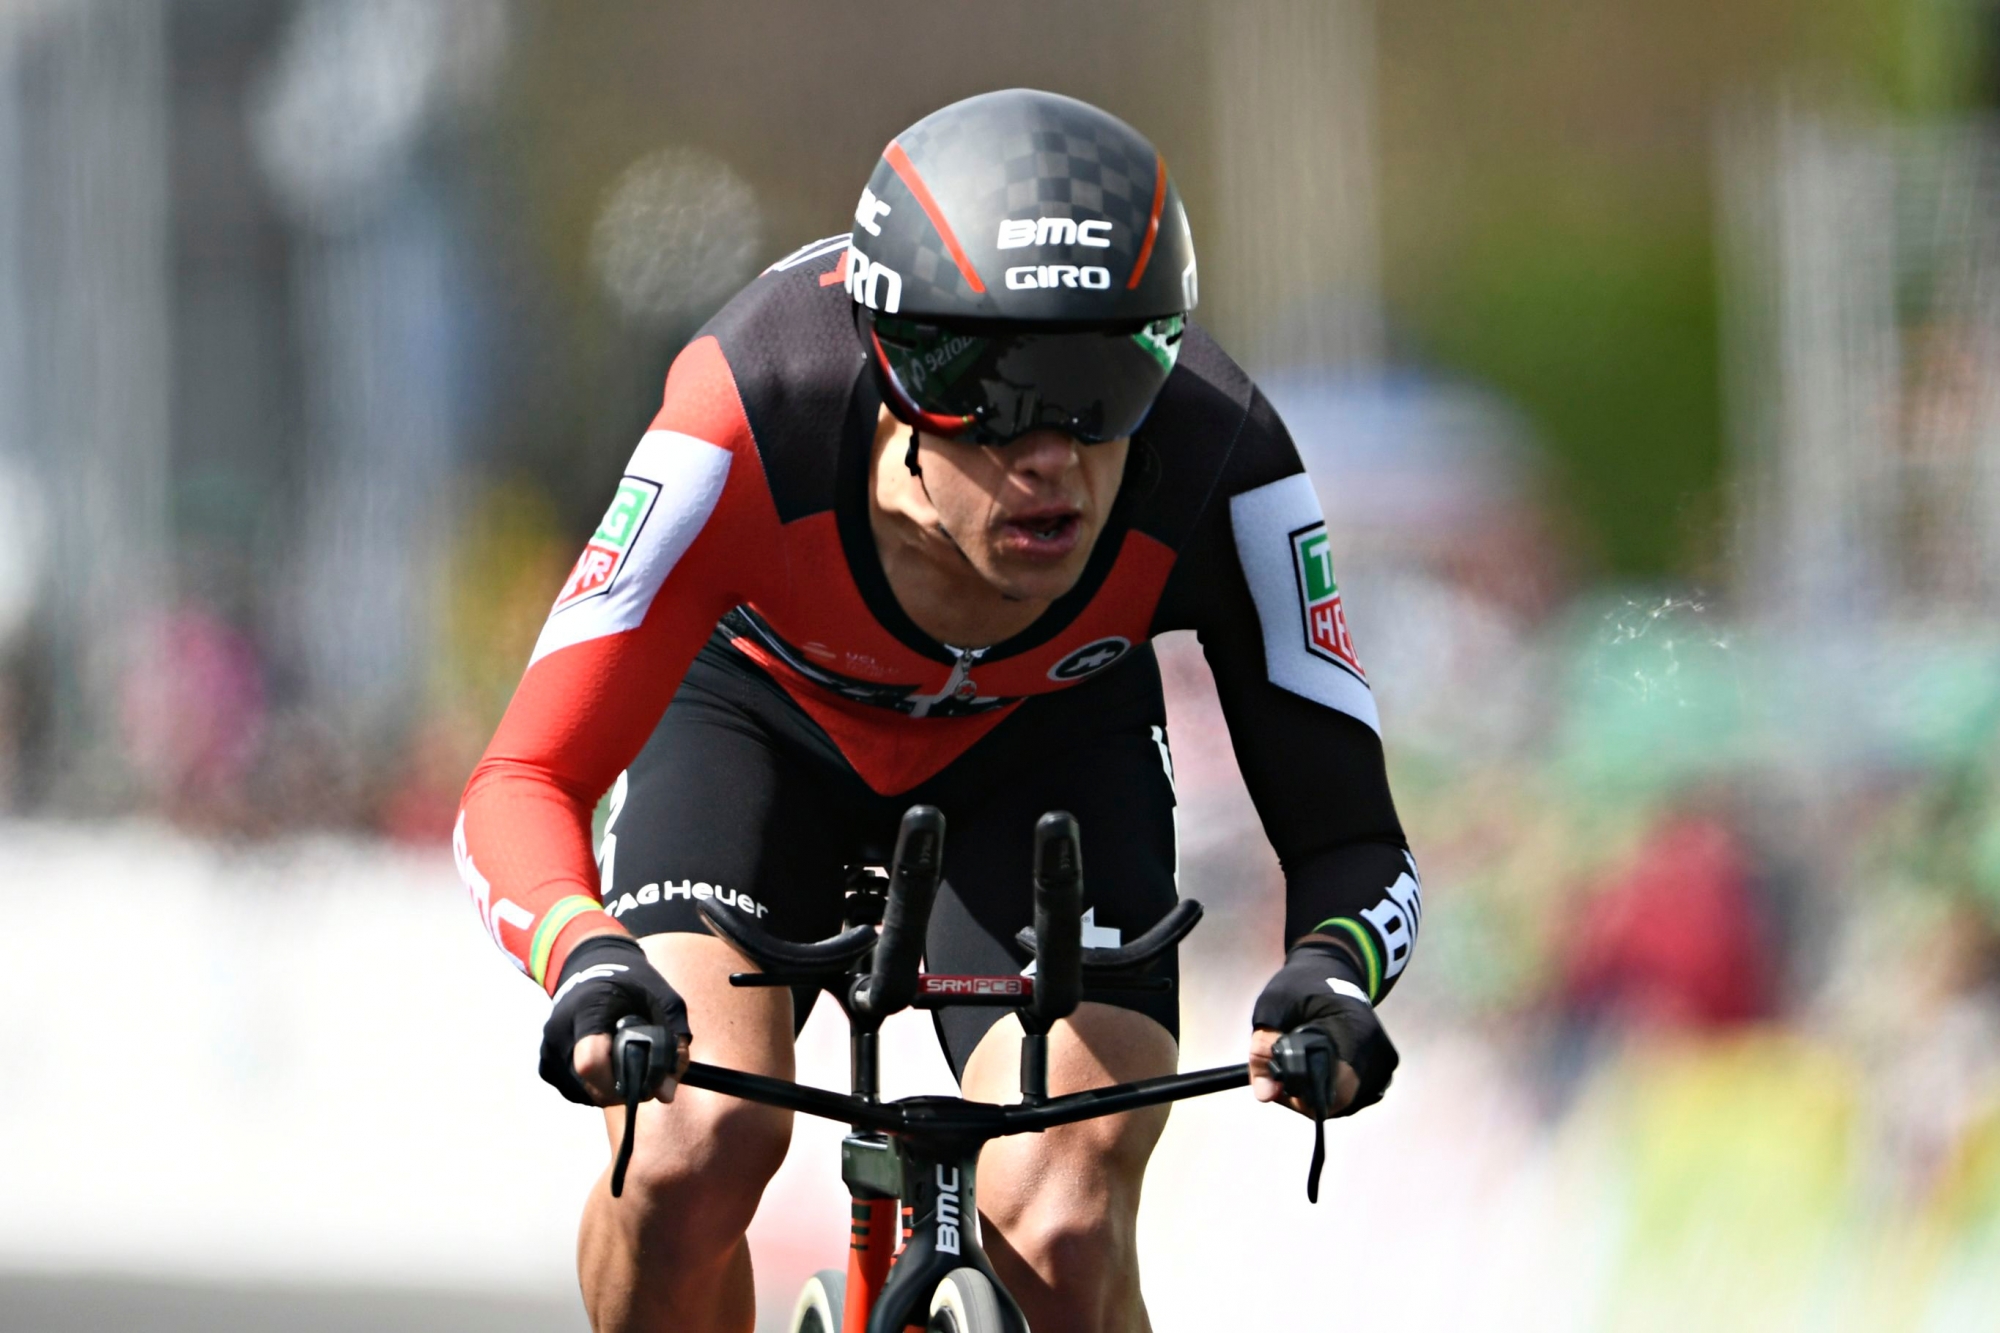 The winner of the 71th Tour de Romandie Richie Porte from Australia of team BMC Racing in action during the fifth and last stage, a 17,88 km race against the clock at the 71th Tour de Romandie UCI ProTour cycling race in Lausanne, Switzerland, on Sunday, April 29, 2017. (KEYSTONE/Alain Grosclaude)porte RAD TOUR DE ROMANDIE 2017